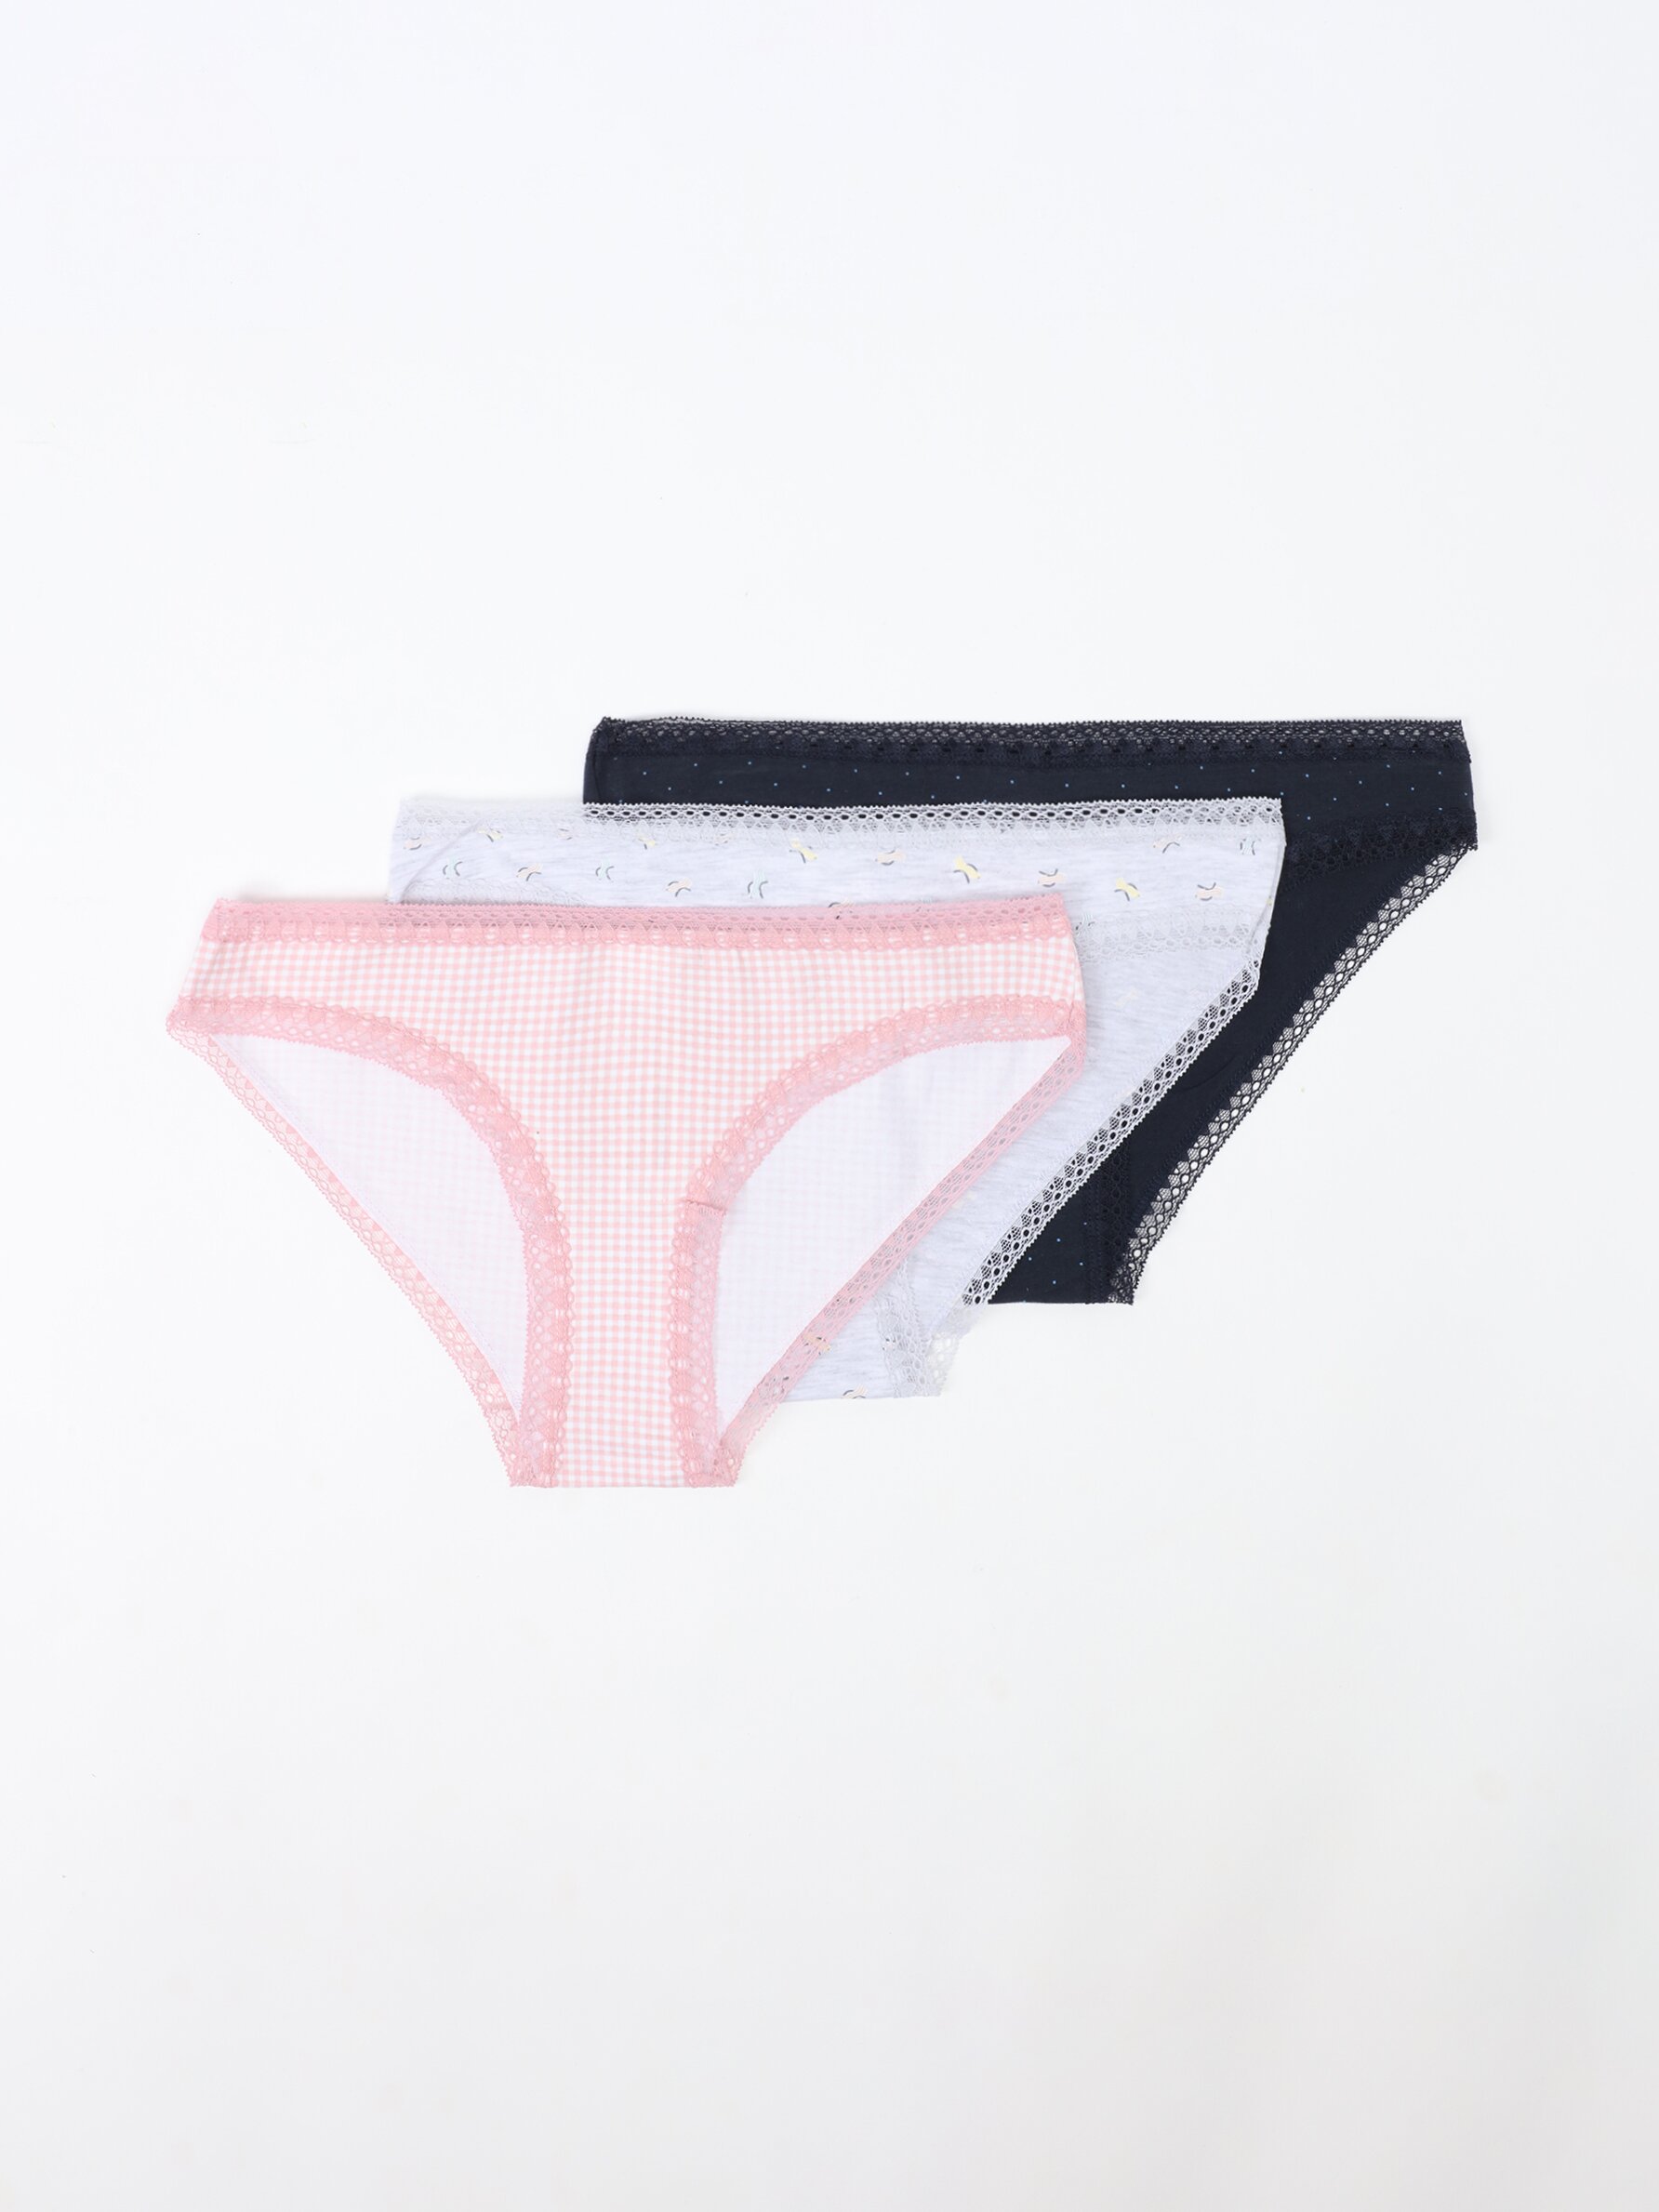 3-Pack of classic briefs with lace trim - Hipster - Underwear